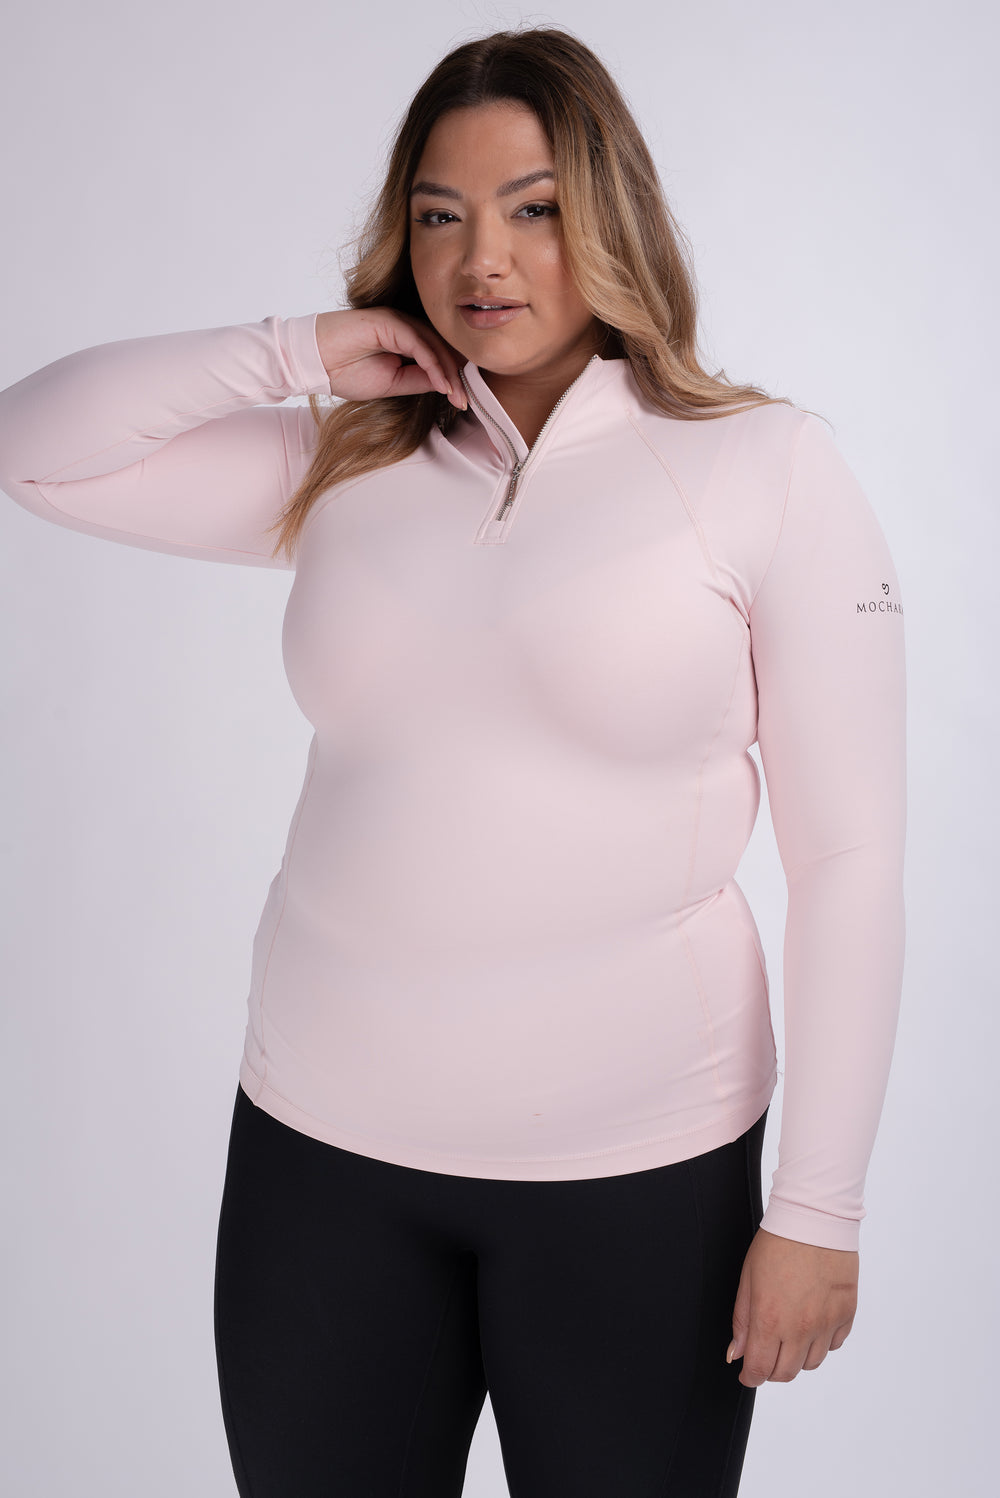 Mochara Technical Base Layer-Southern Sport Horses-The Equestrian